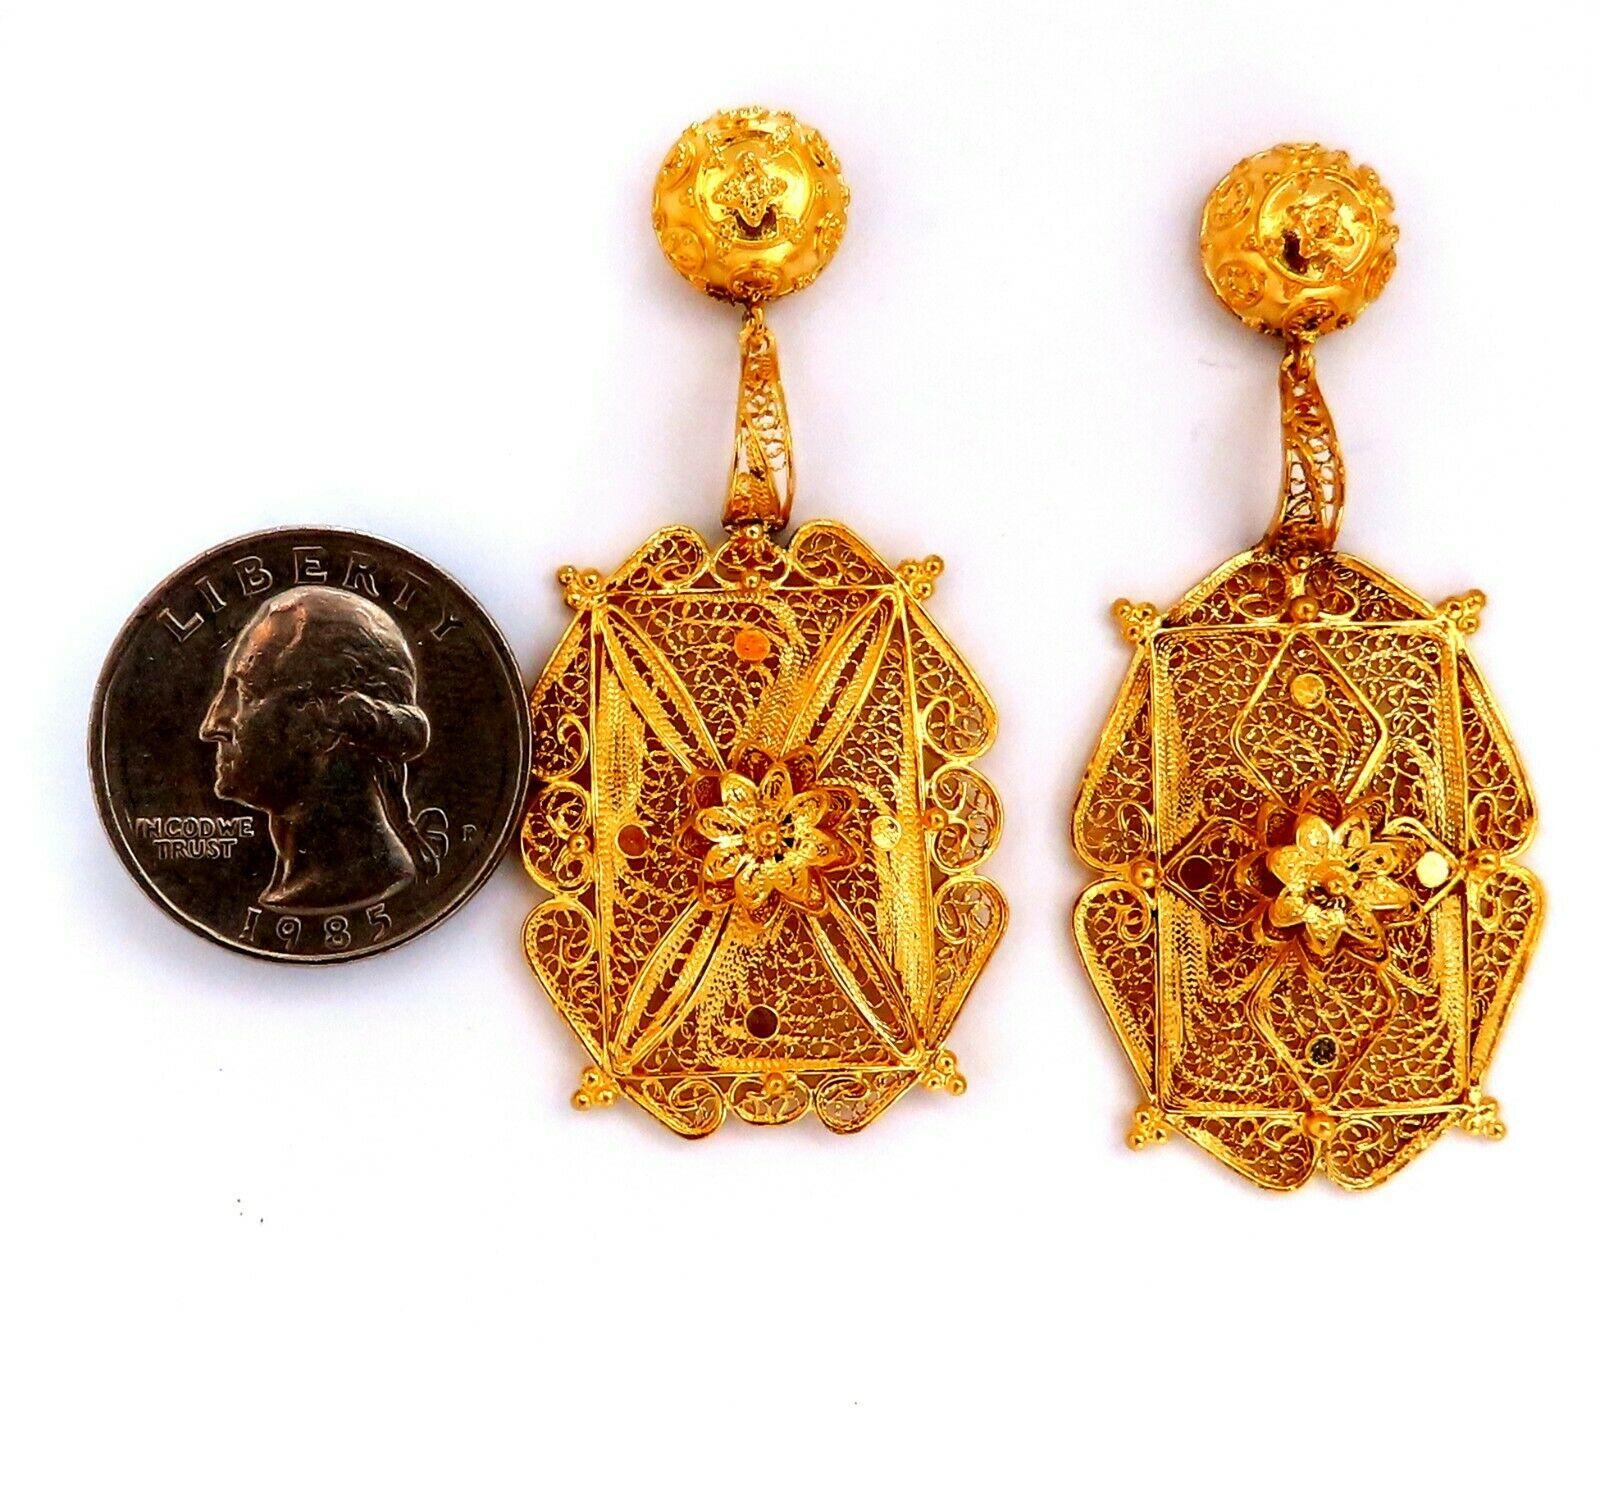 Intricate Detail Dangle Earrings

Measurements: 

2 x 1.05 inch

Depth: .23inch

9.3 grams / 14kt. Yellow Gold

Earrings are gorgeous made